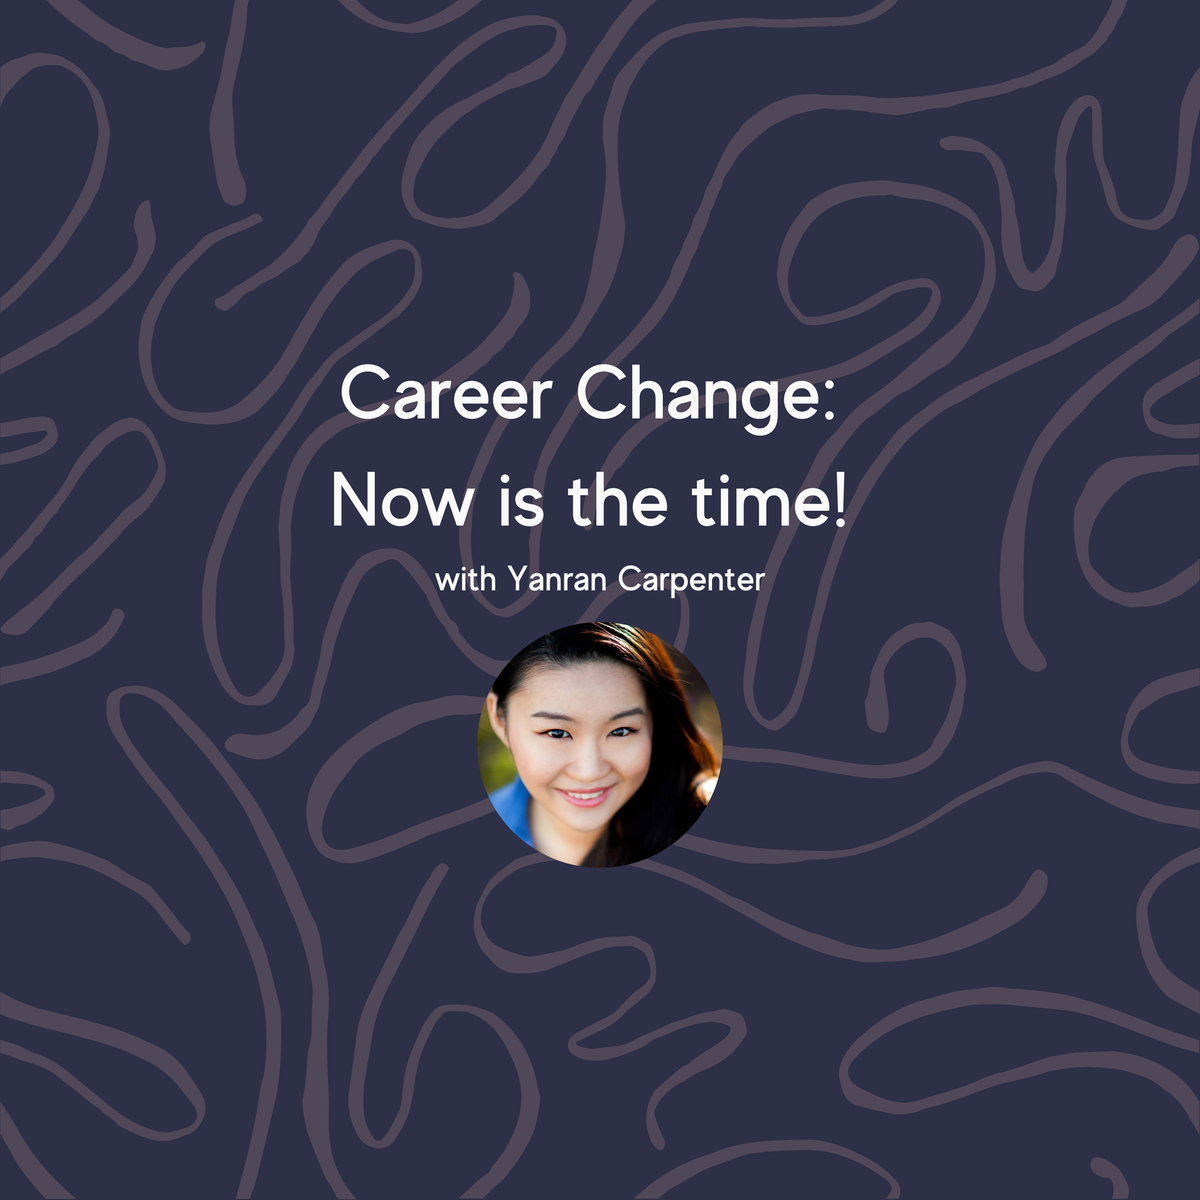 Career Change: Now is the time! with Yanran Carpenter